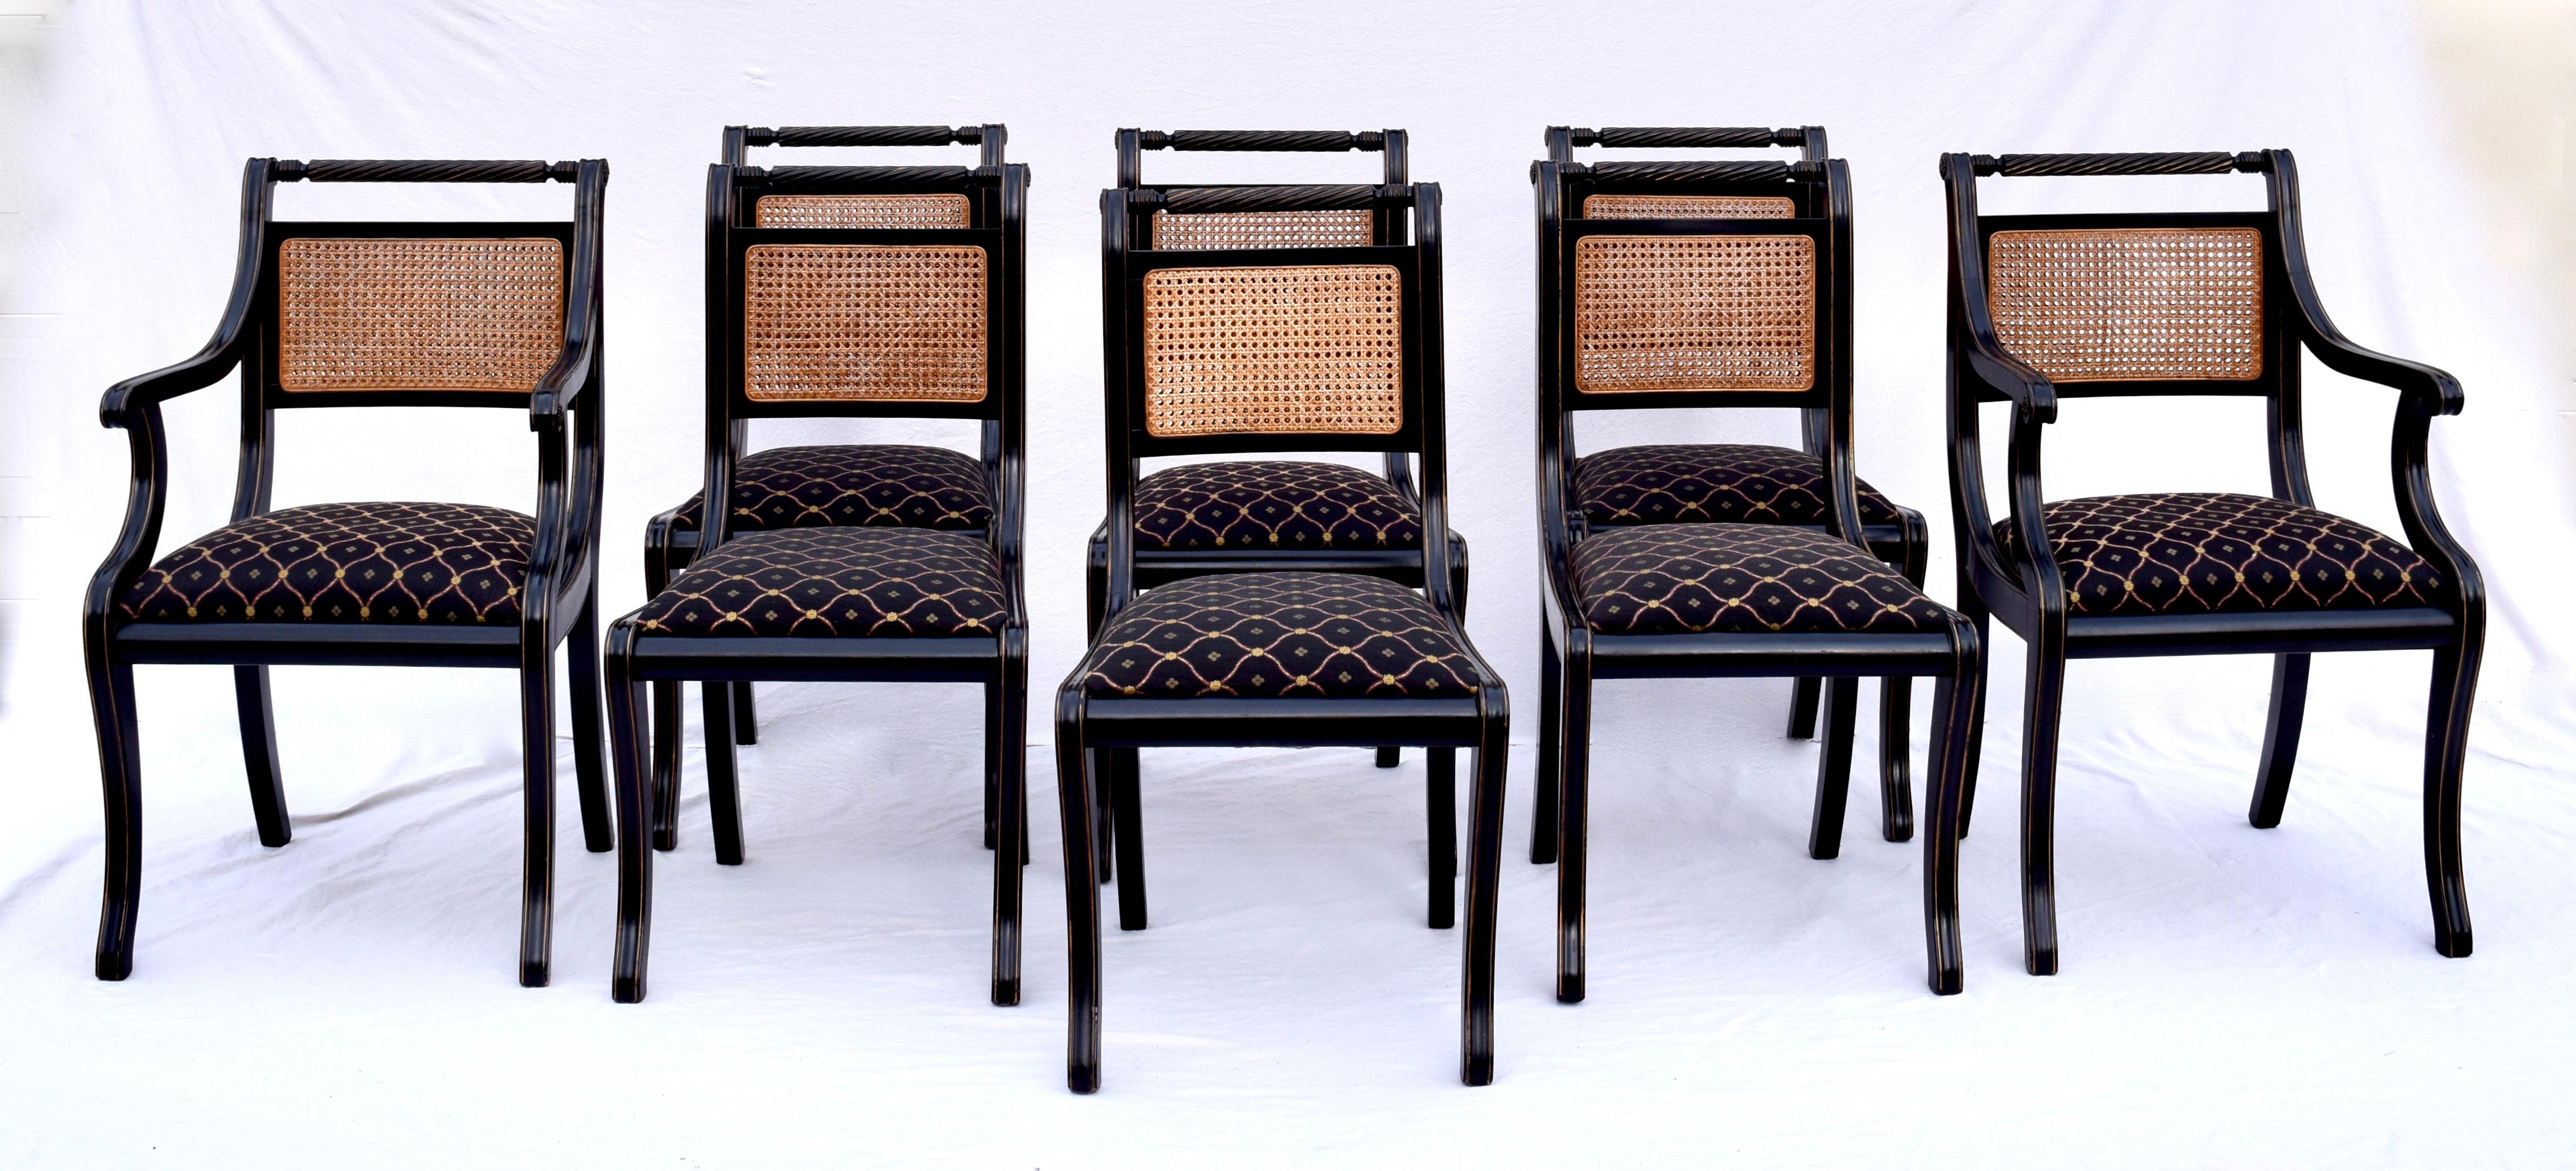 Set of eight English Regency style dining chairs feature solid lacquered wood construction with rope twist horizontal crests having substantial double caned back and front detailing. Upholstered seats raised on Klismos legs with gold gilt accents